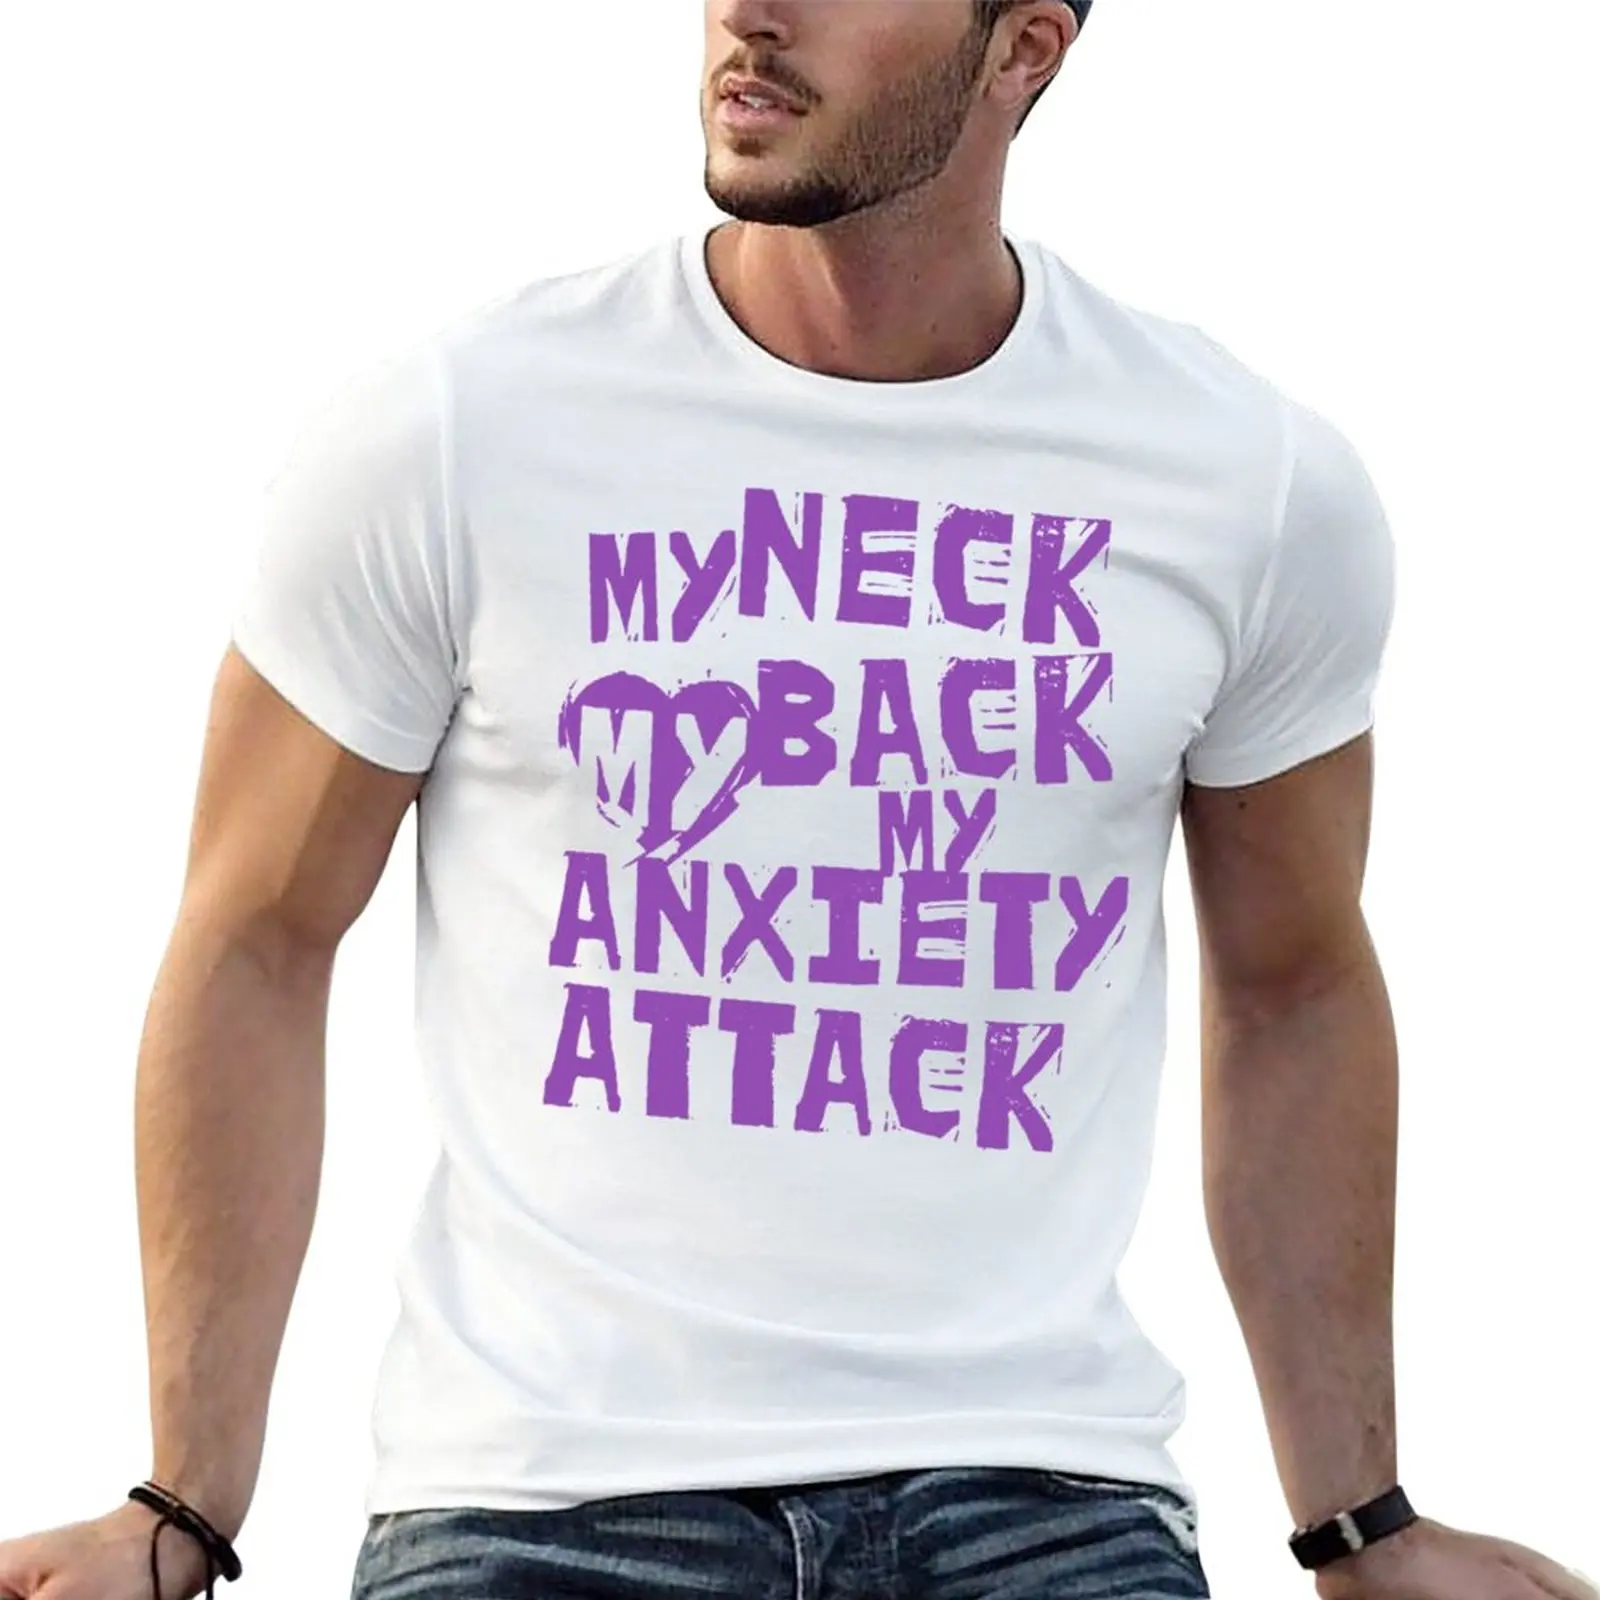 

New My Neck, My Back, My Anxiety Attack Fitted Scoop T-Shirt Short t-shirt oversized t shirt men t shirt